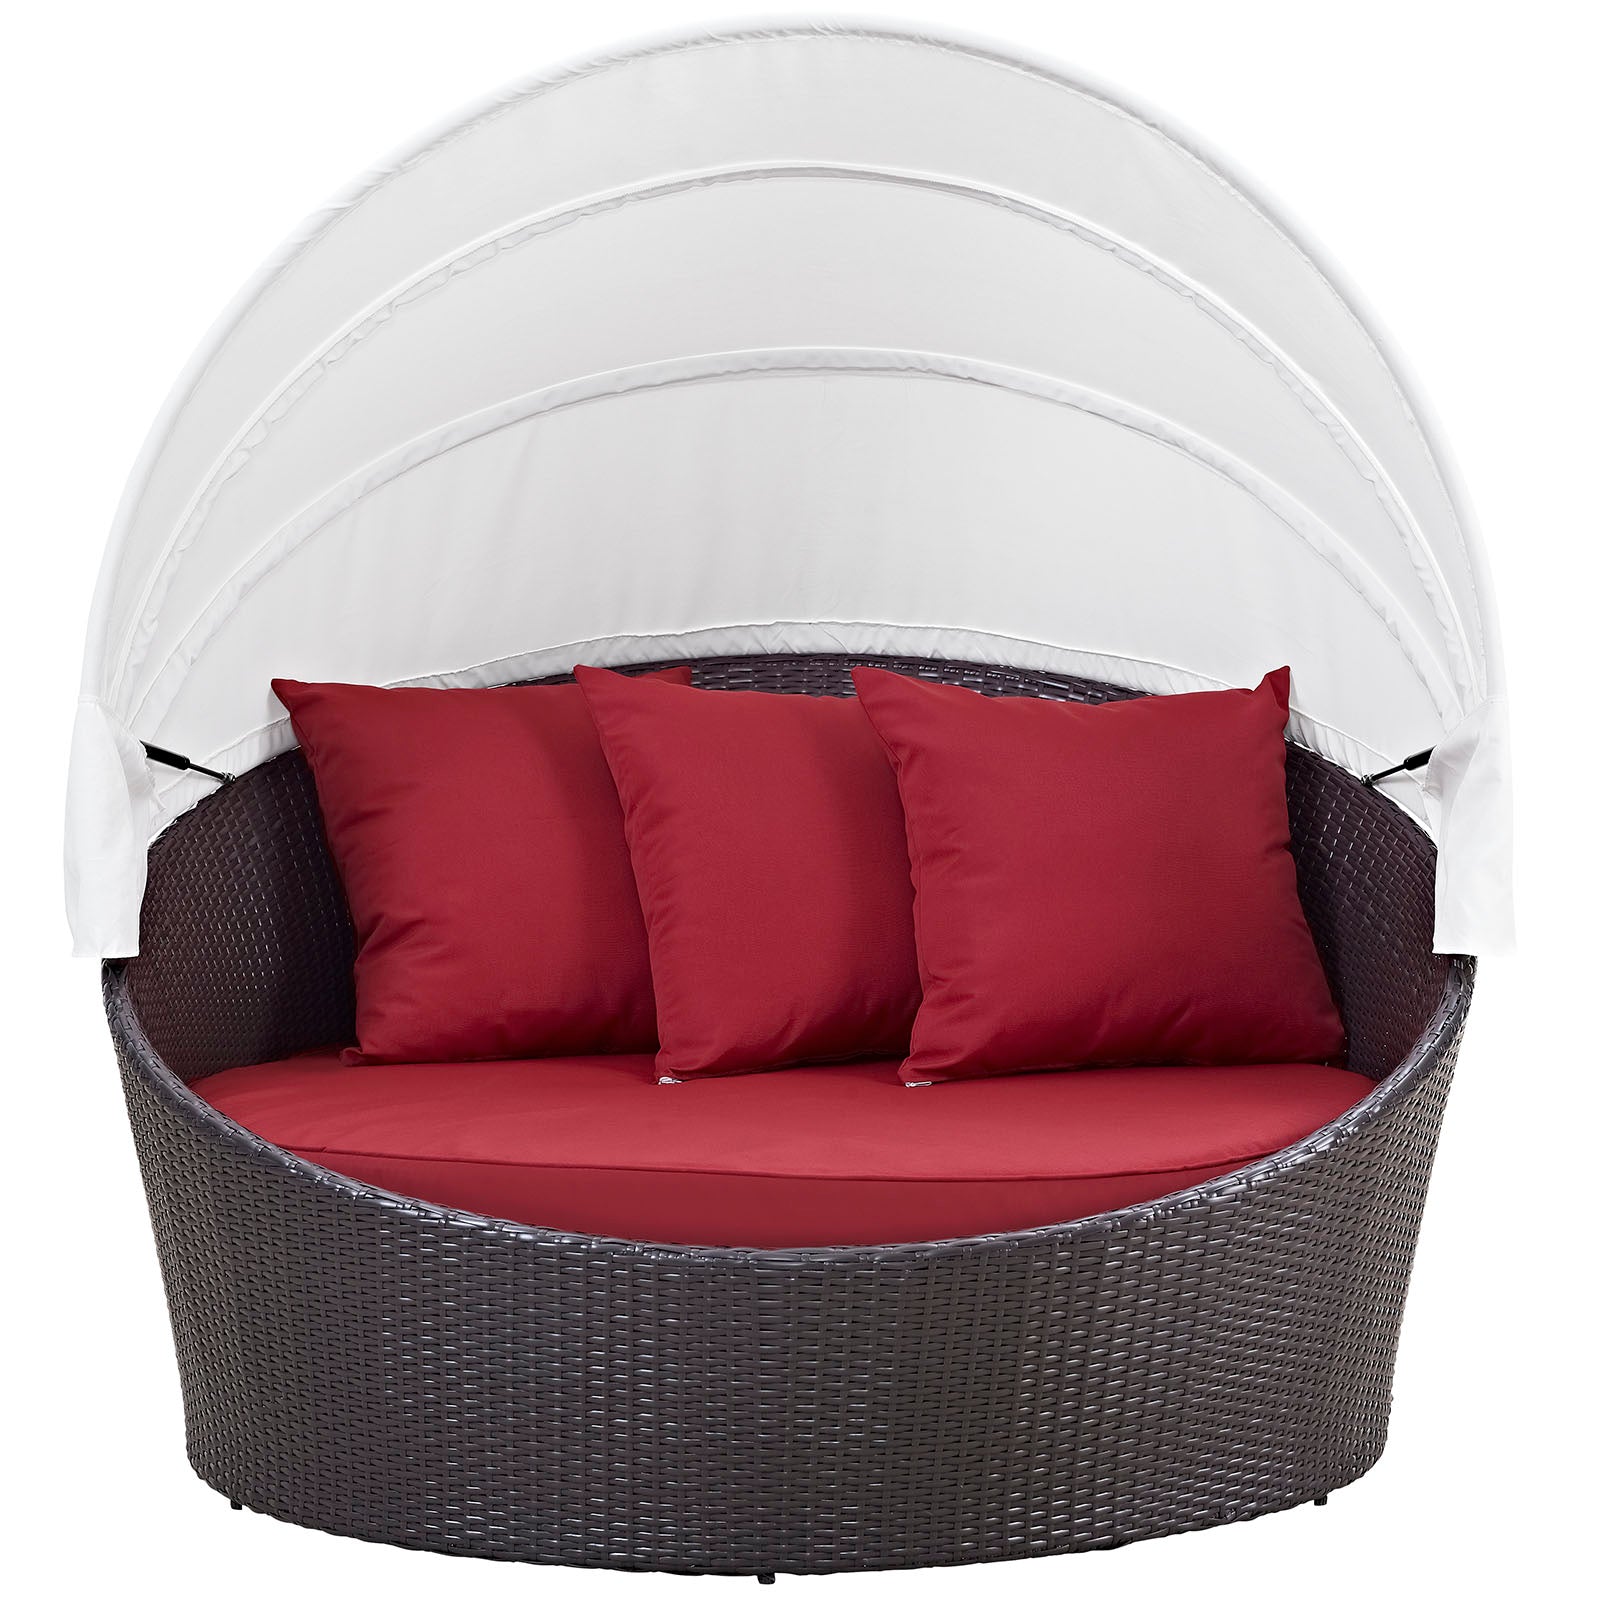 Modway - Convene Canopy Outdoor Patio Daybed - EEI-2175